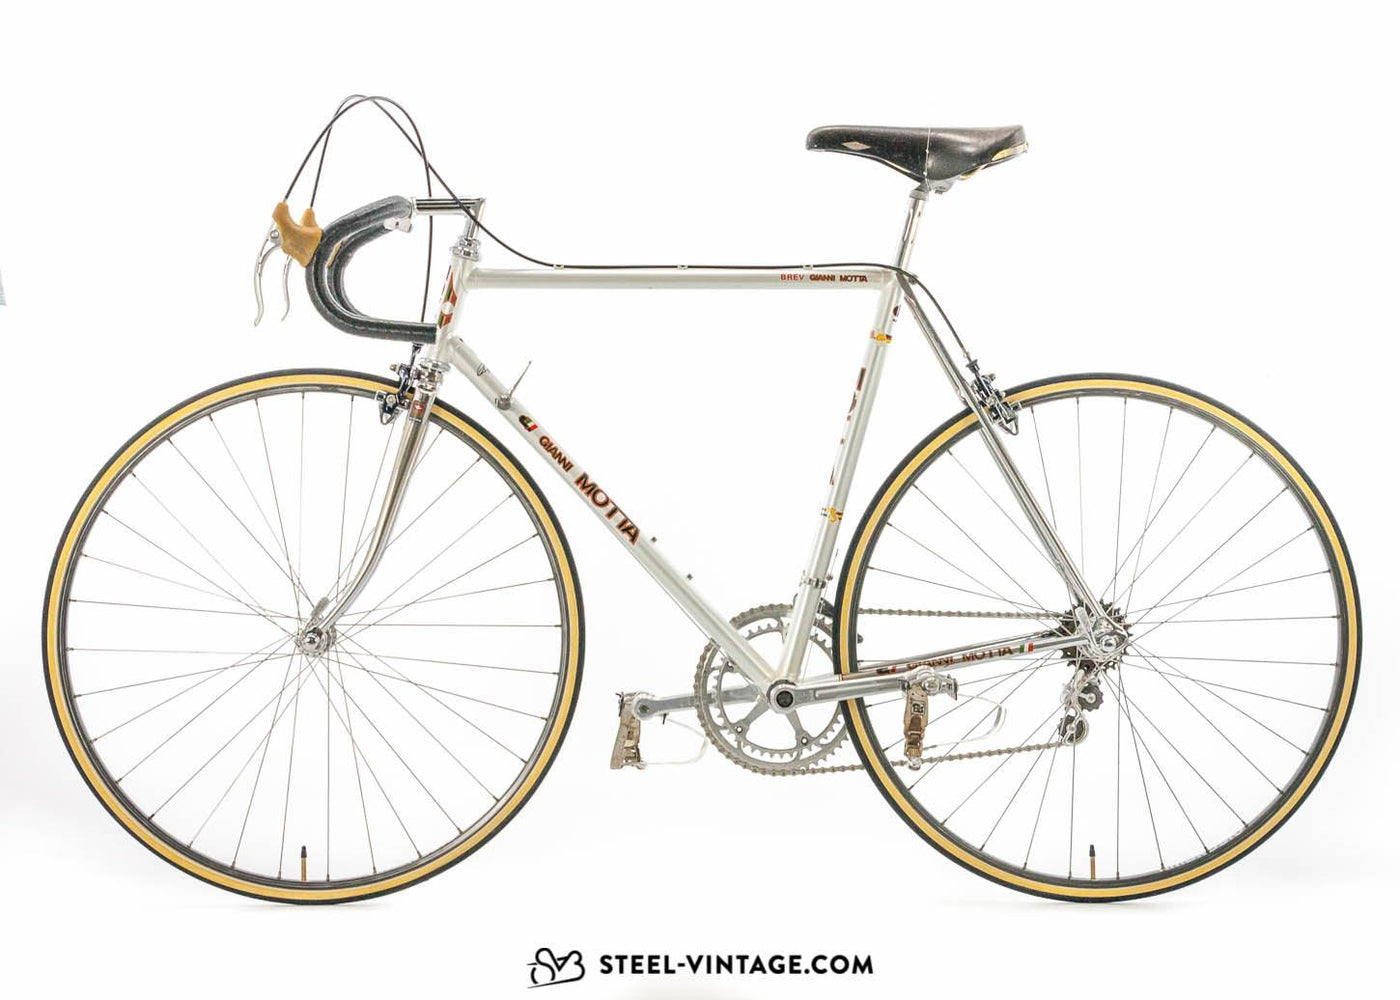 Gianni Motta Personal Vintage Bicycle from early 1980s | Steel Vintage Bikes